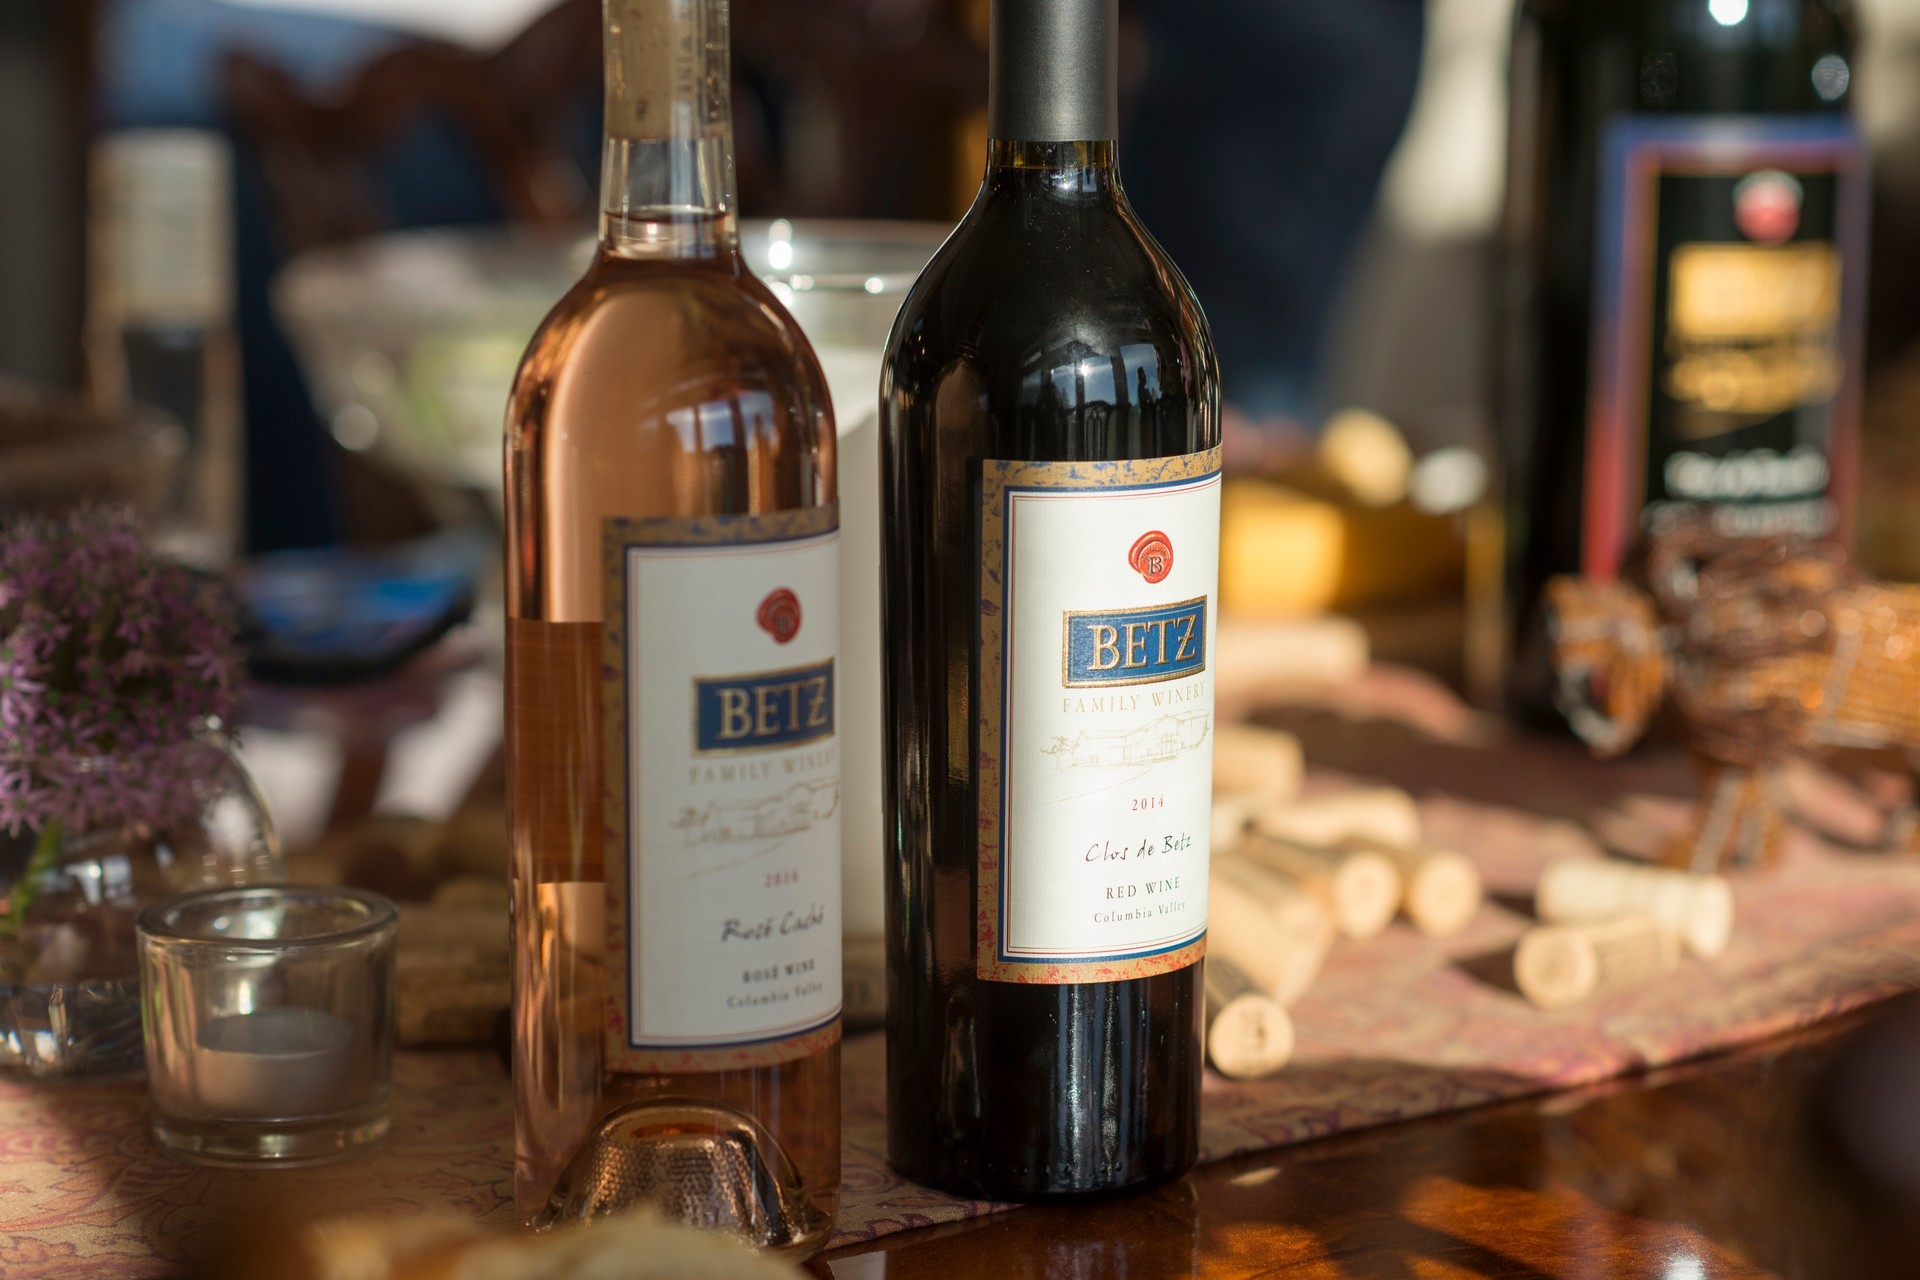 A bottle of red wine to the right; a bottle of white to the left with the Betz Family WInery label on both, and a cheeseboard in the backrgound